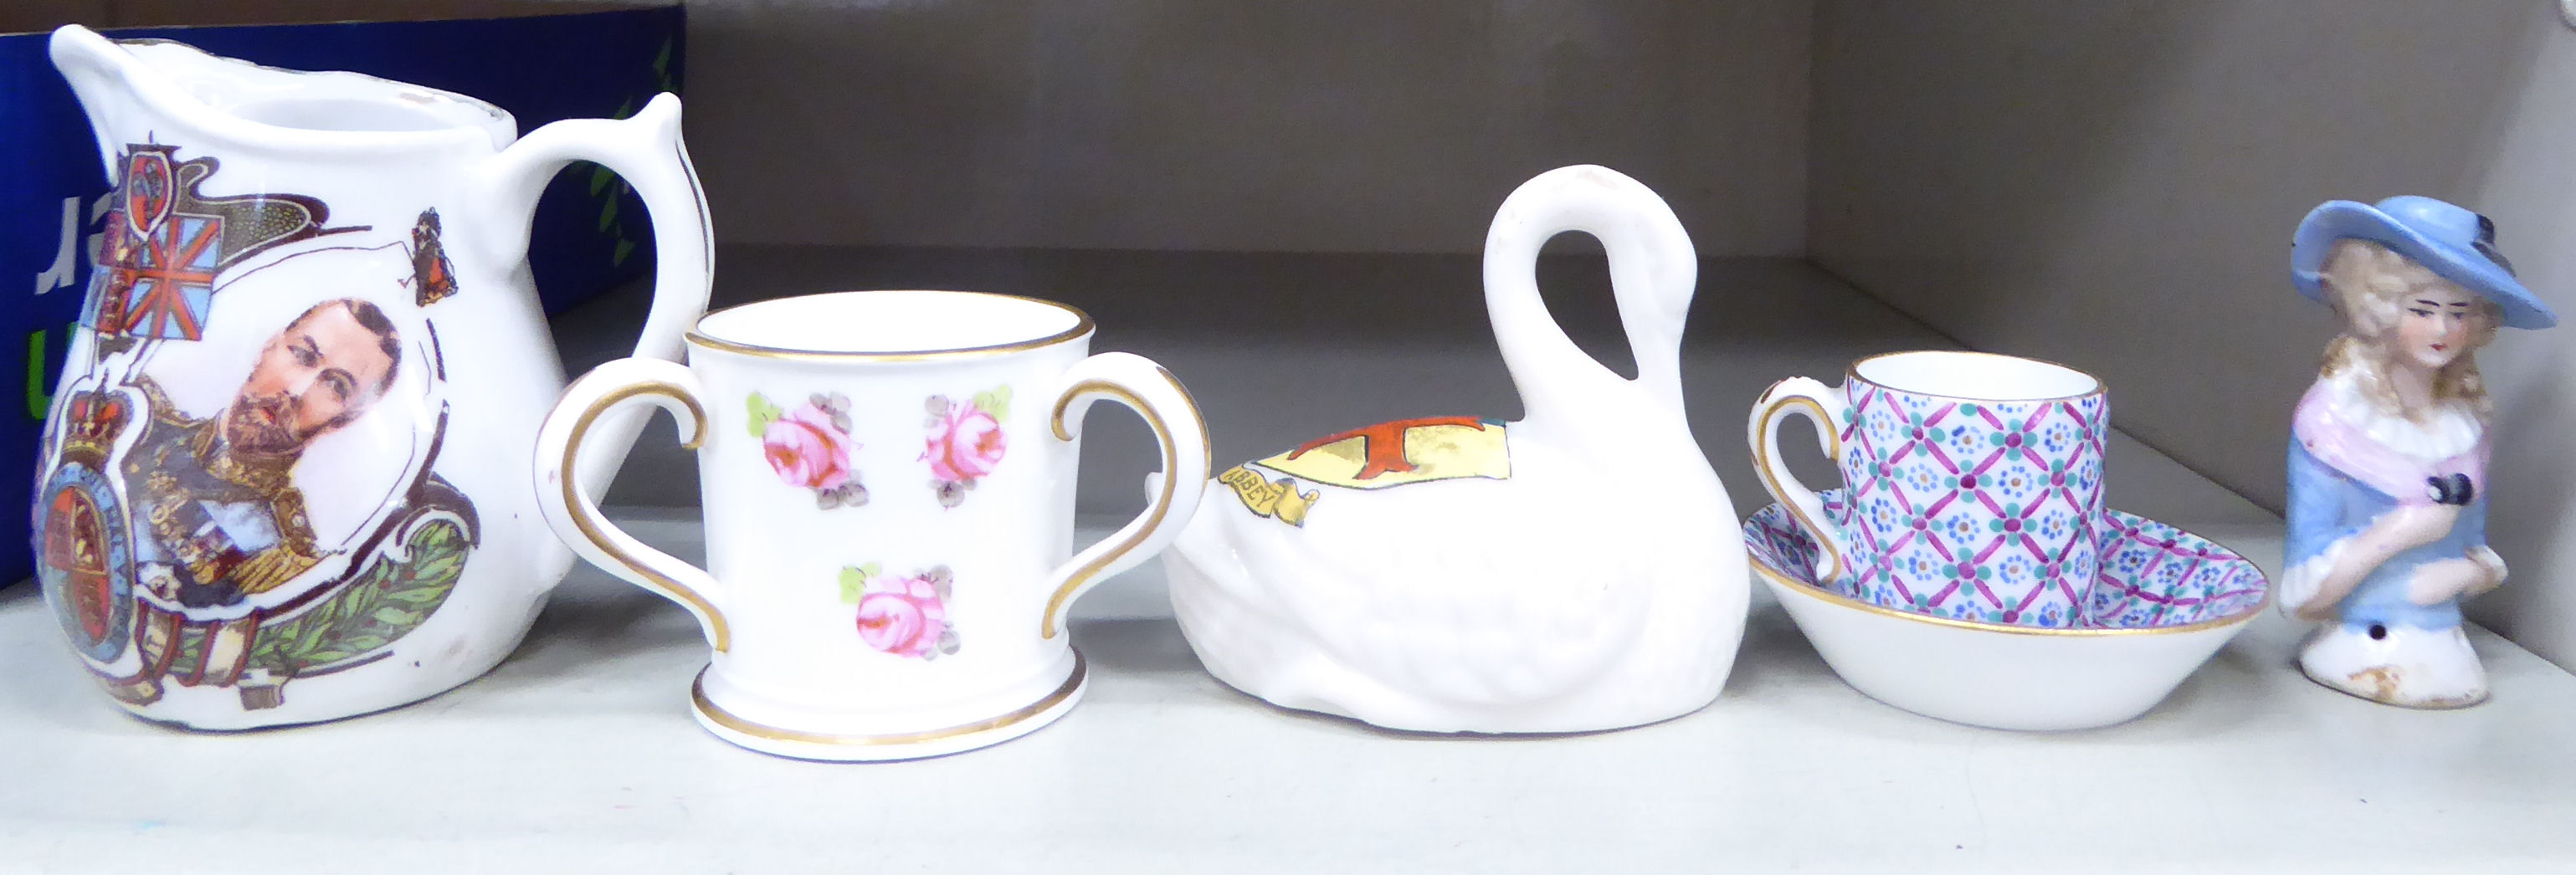 Miniature ceramic ornaments: to include a Sevres porcelain cup and saucer;